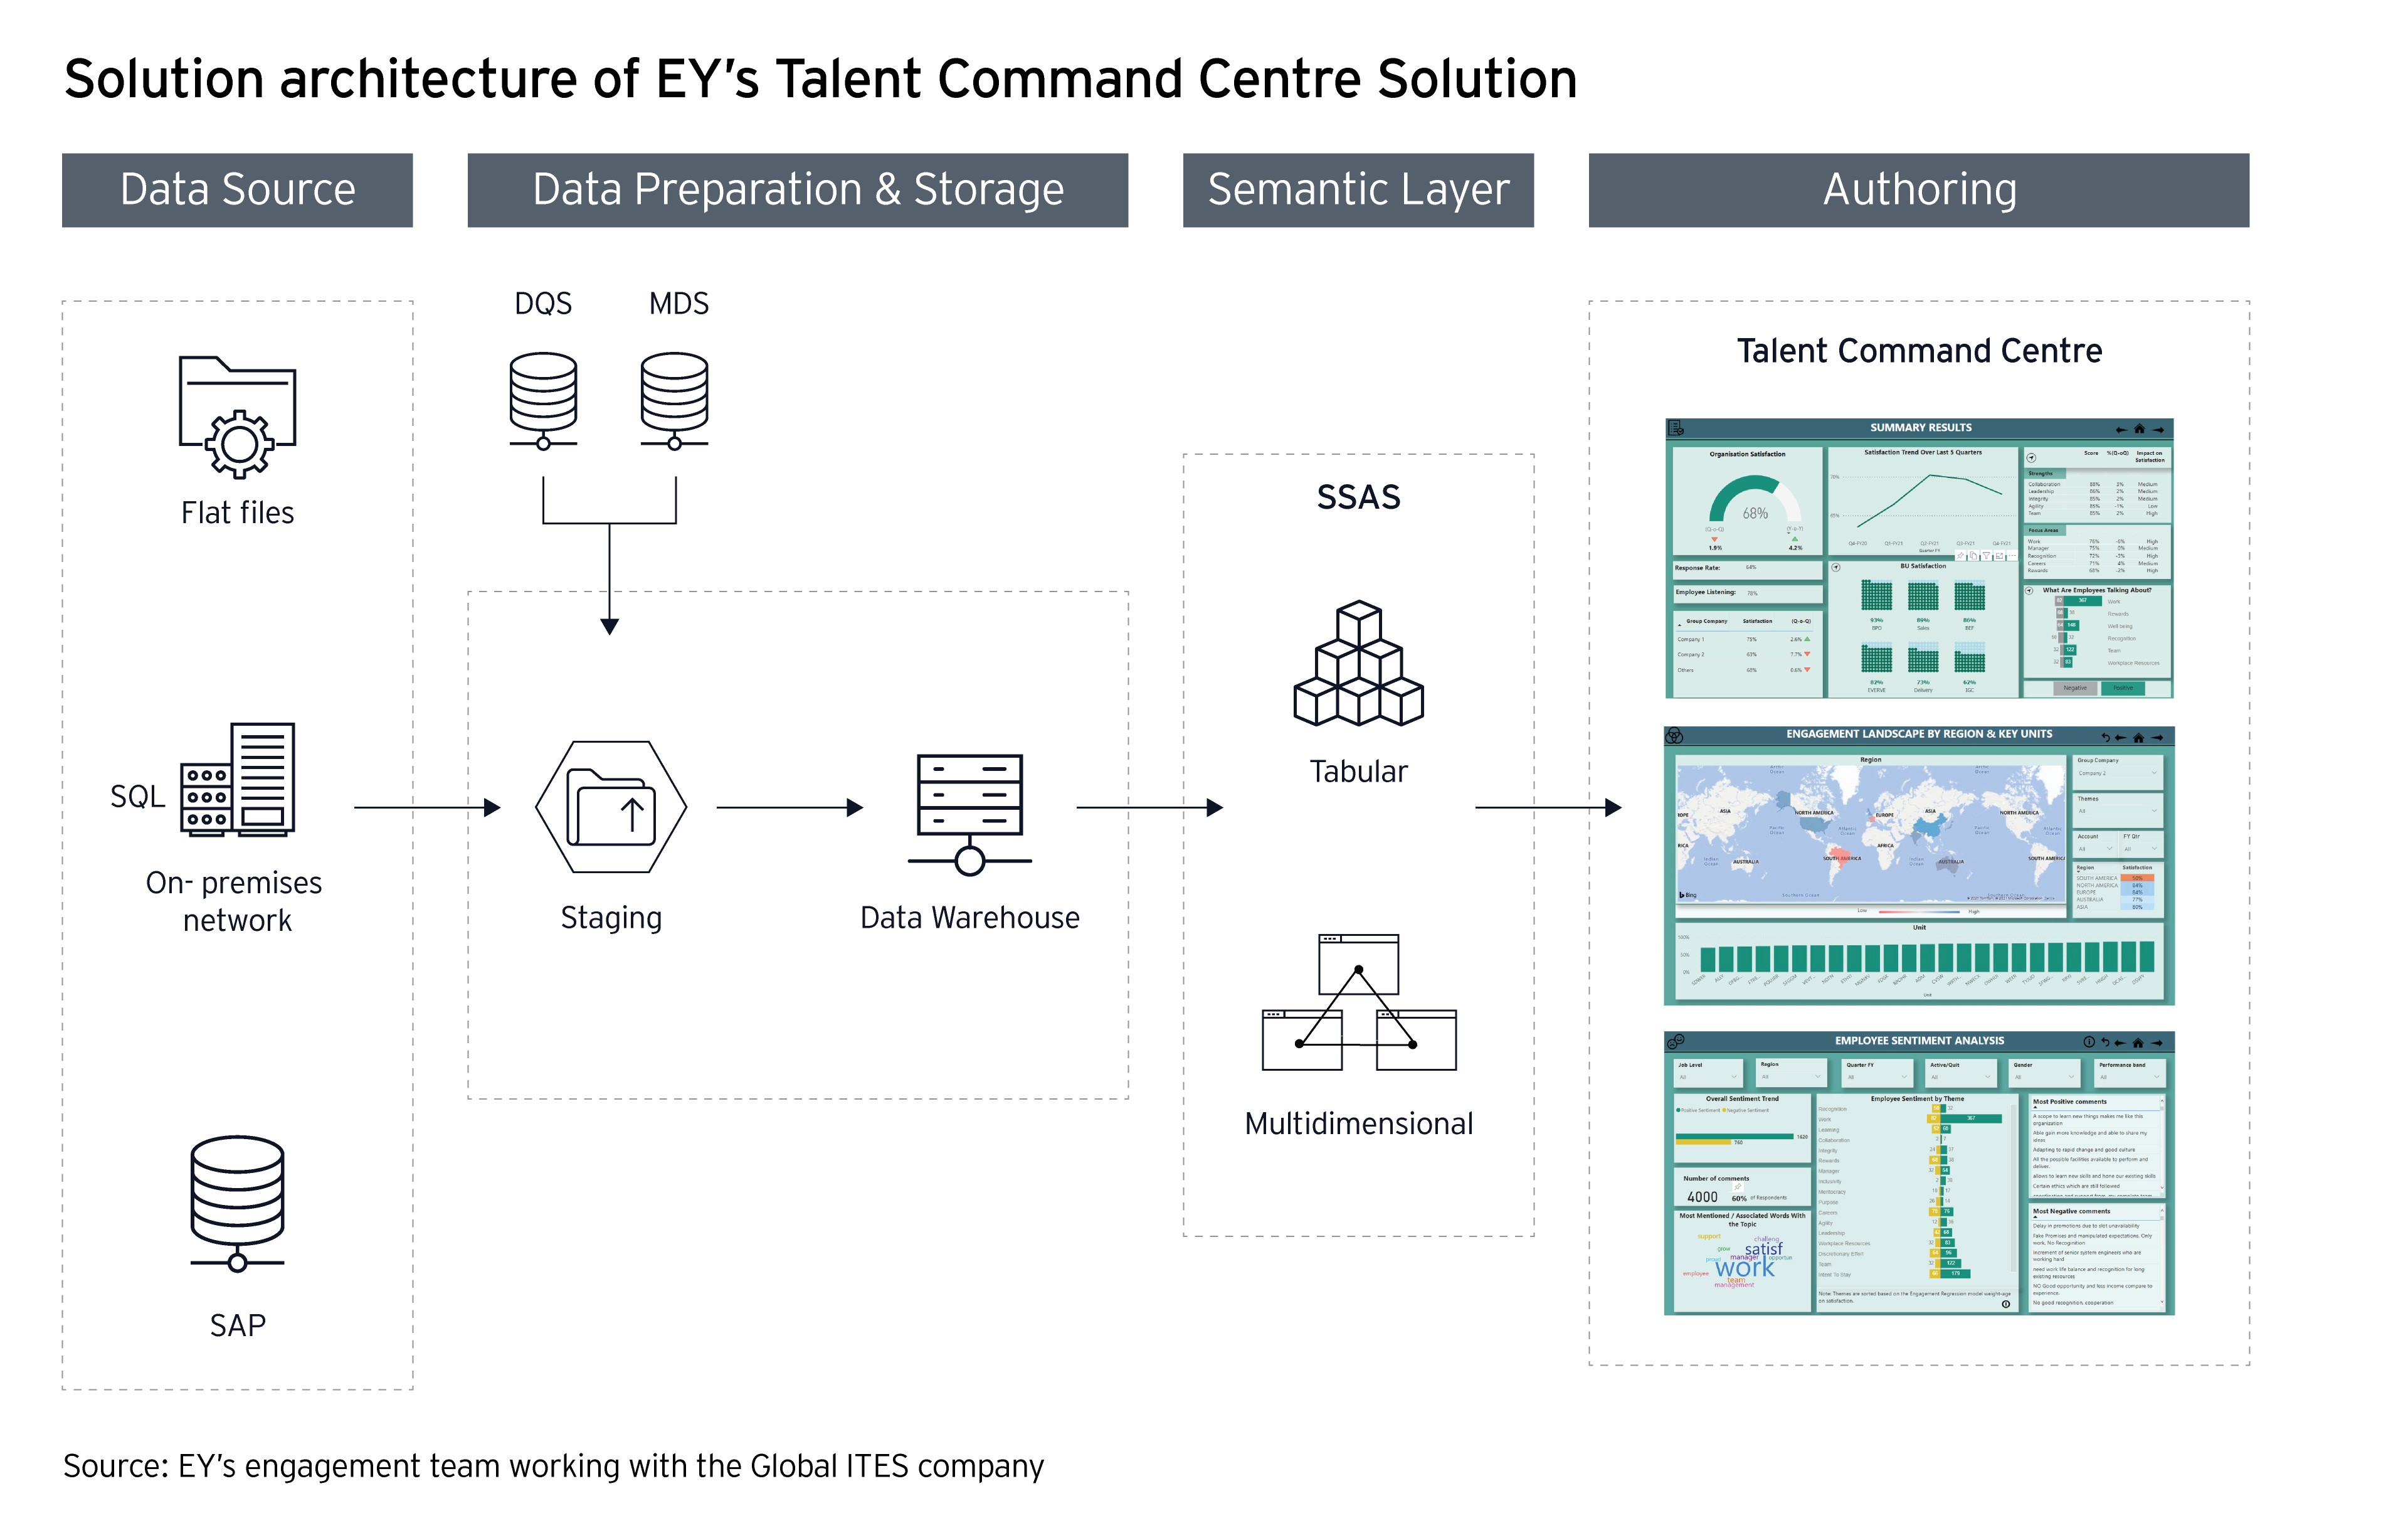 Solution architecture of EY’s Talent Command Centre Solution